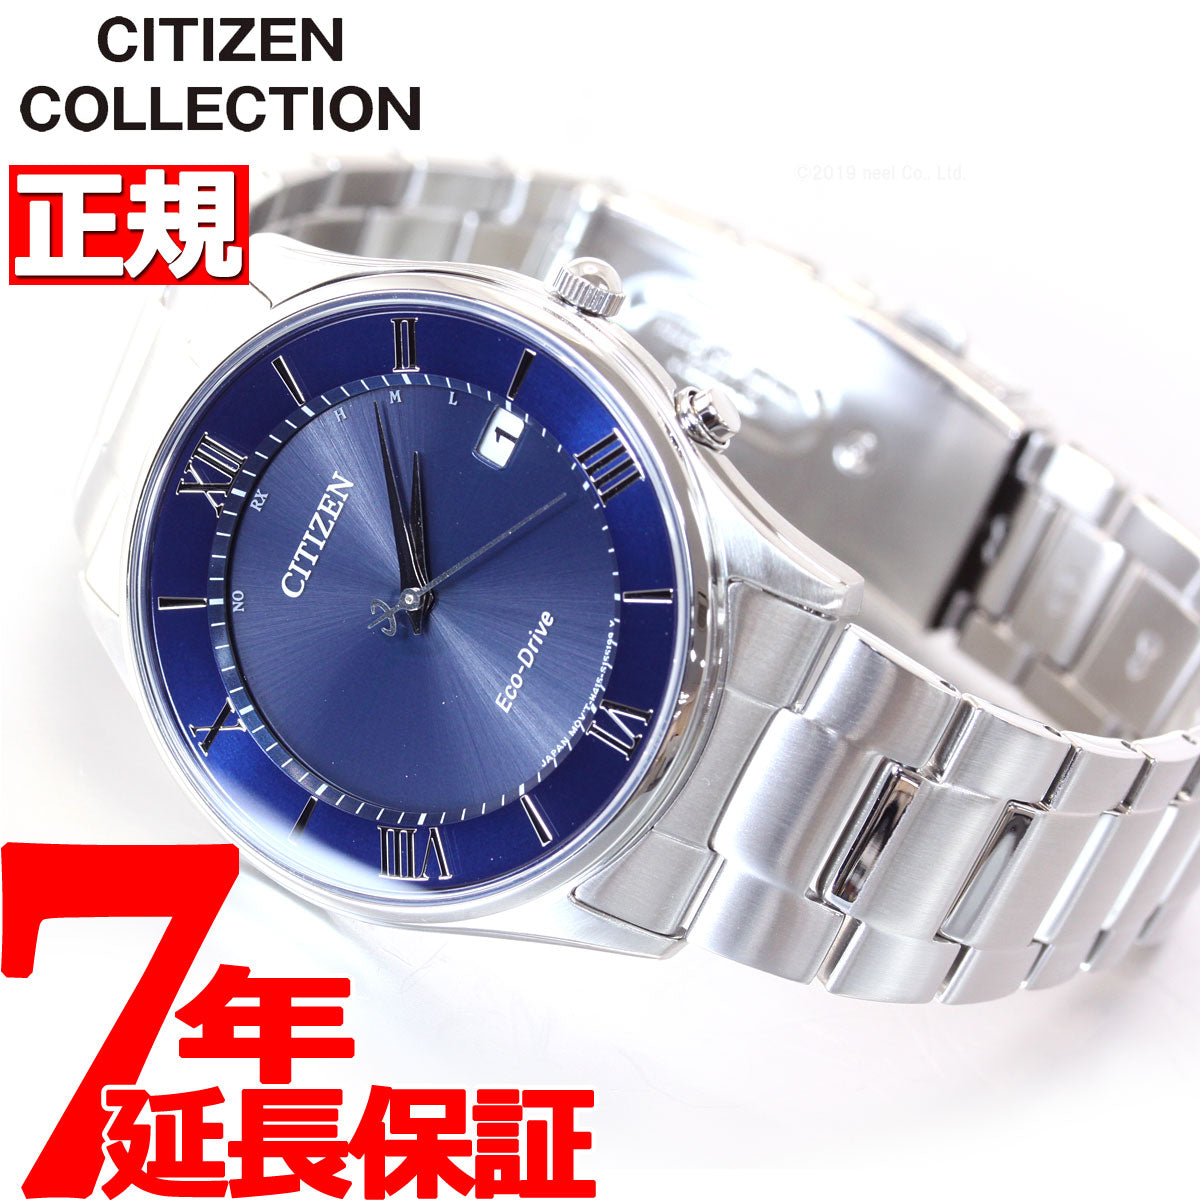 CITIZEN Collection AS  1060-54Lエコドライブ